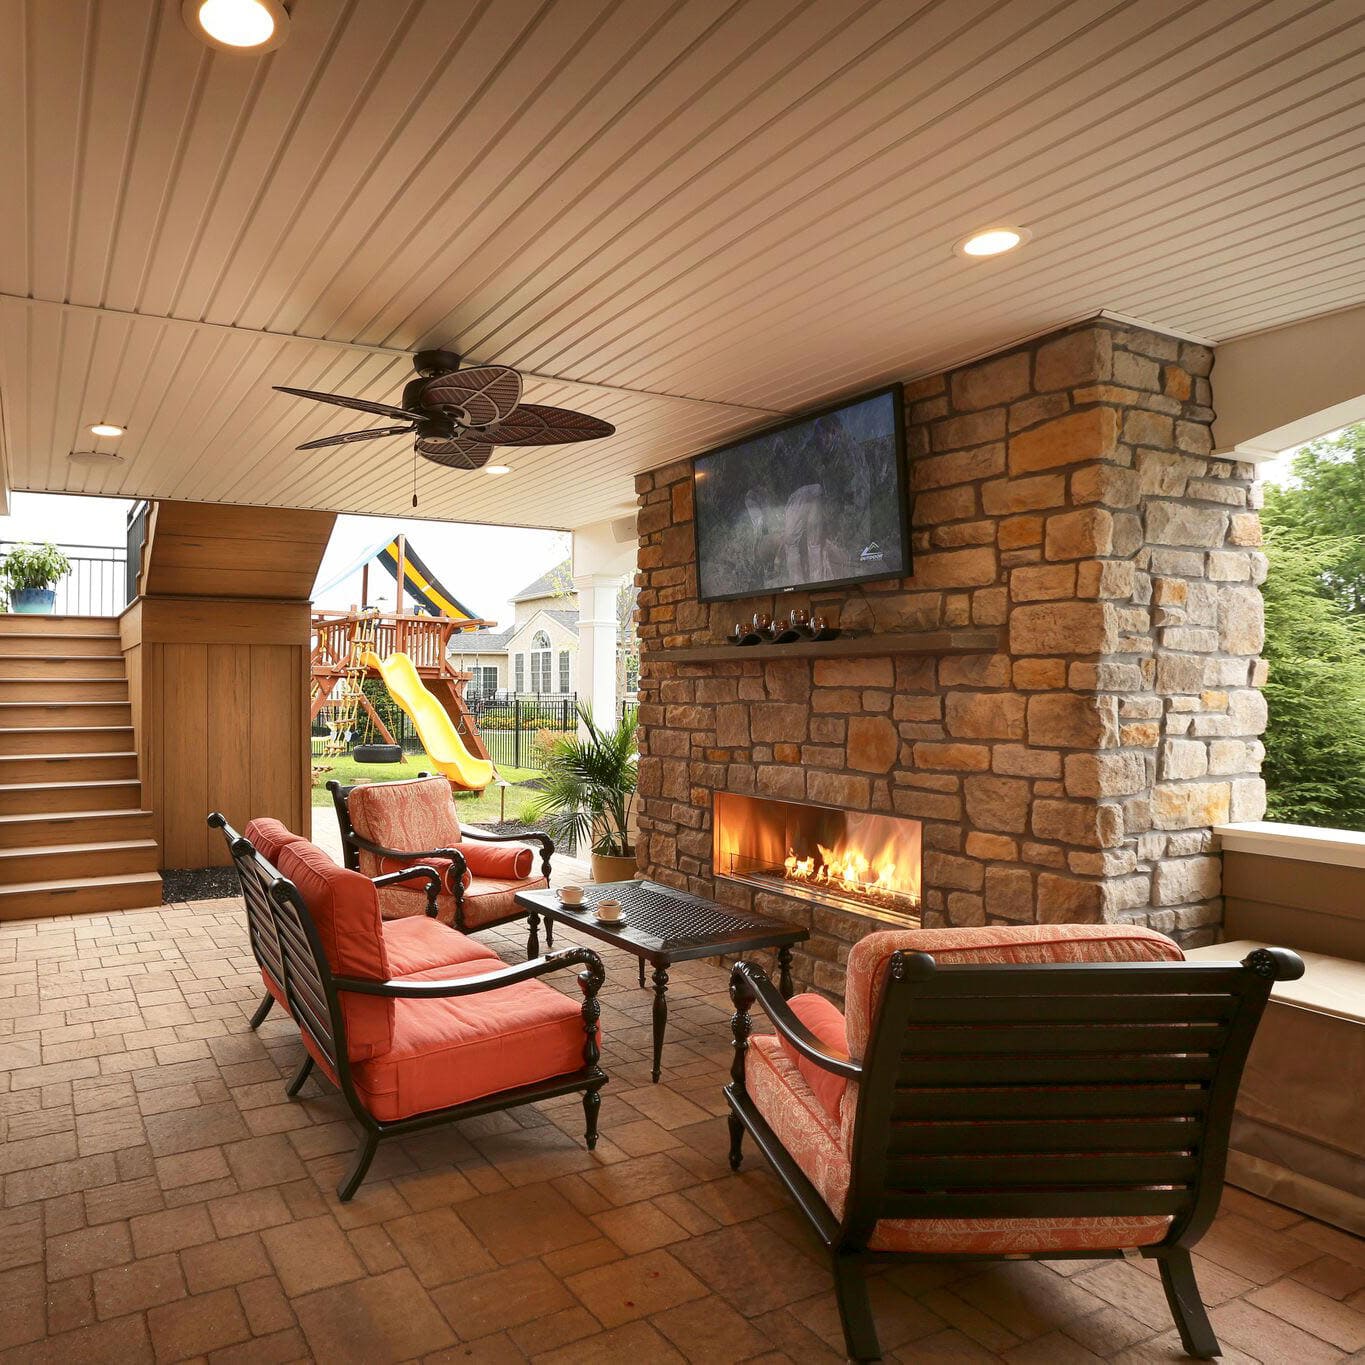 Dry under-deck systems provide added lounge and entertainment areas to your outdoor living plan. Read more about this Limerick, PA project!